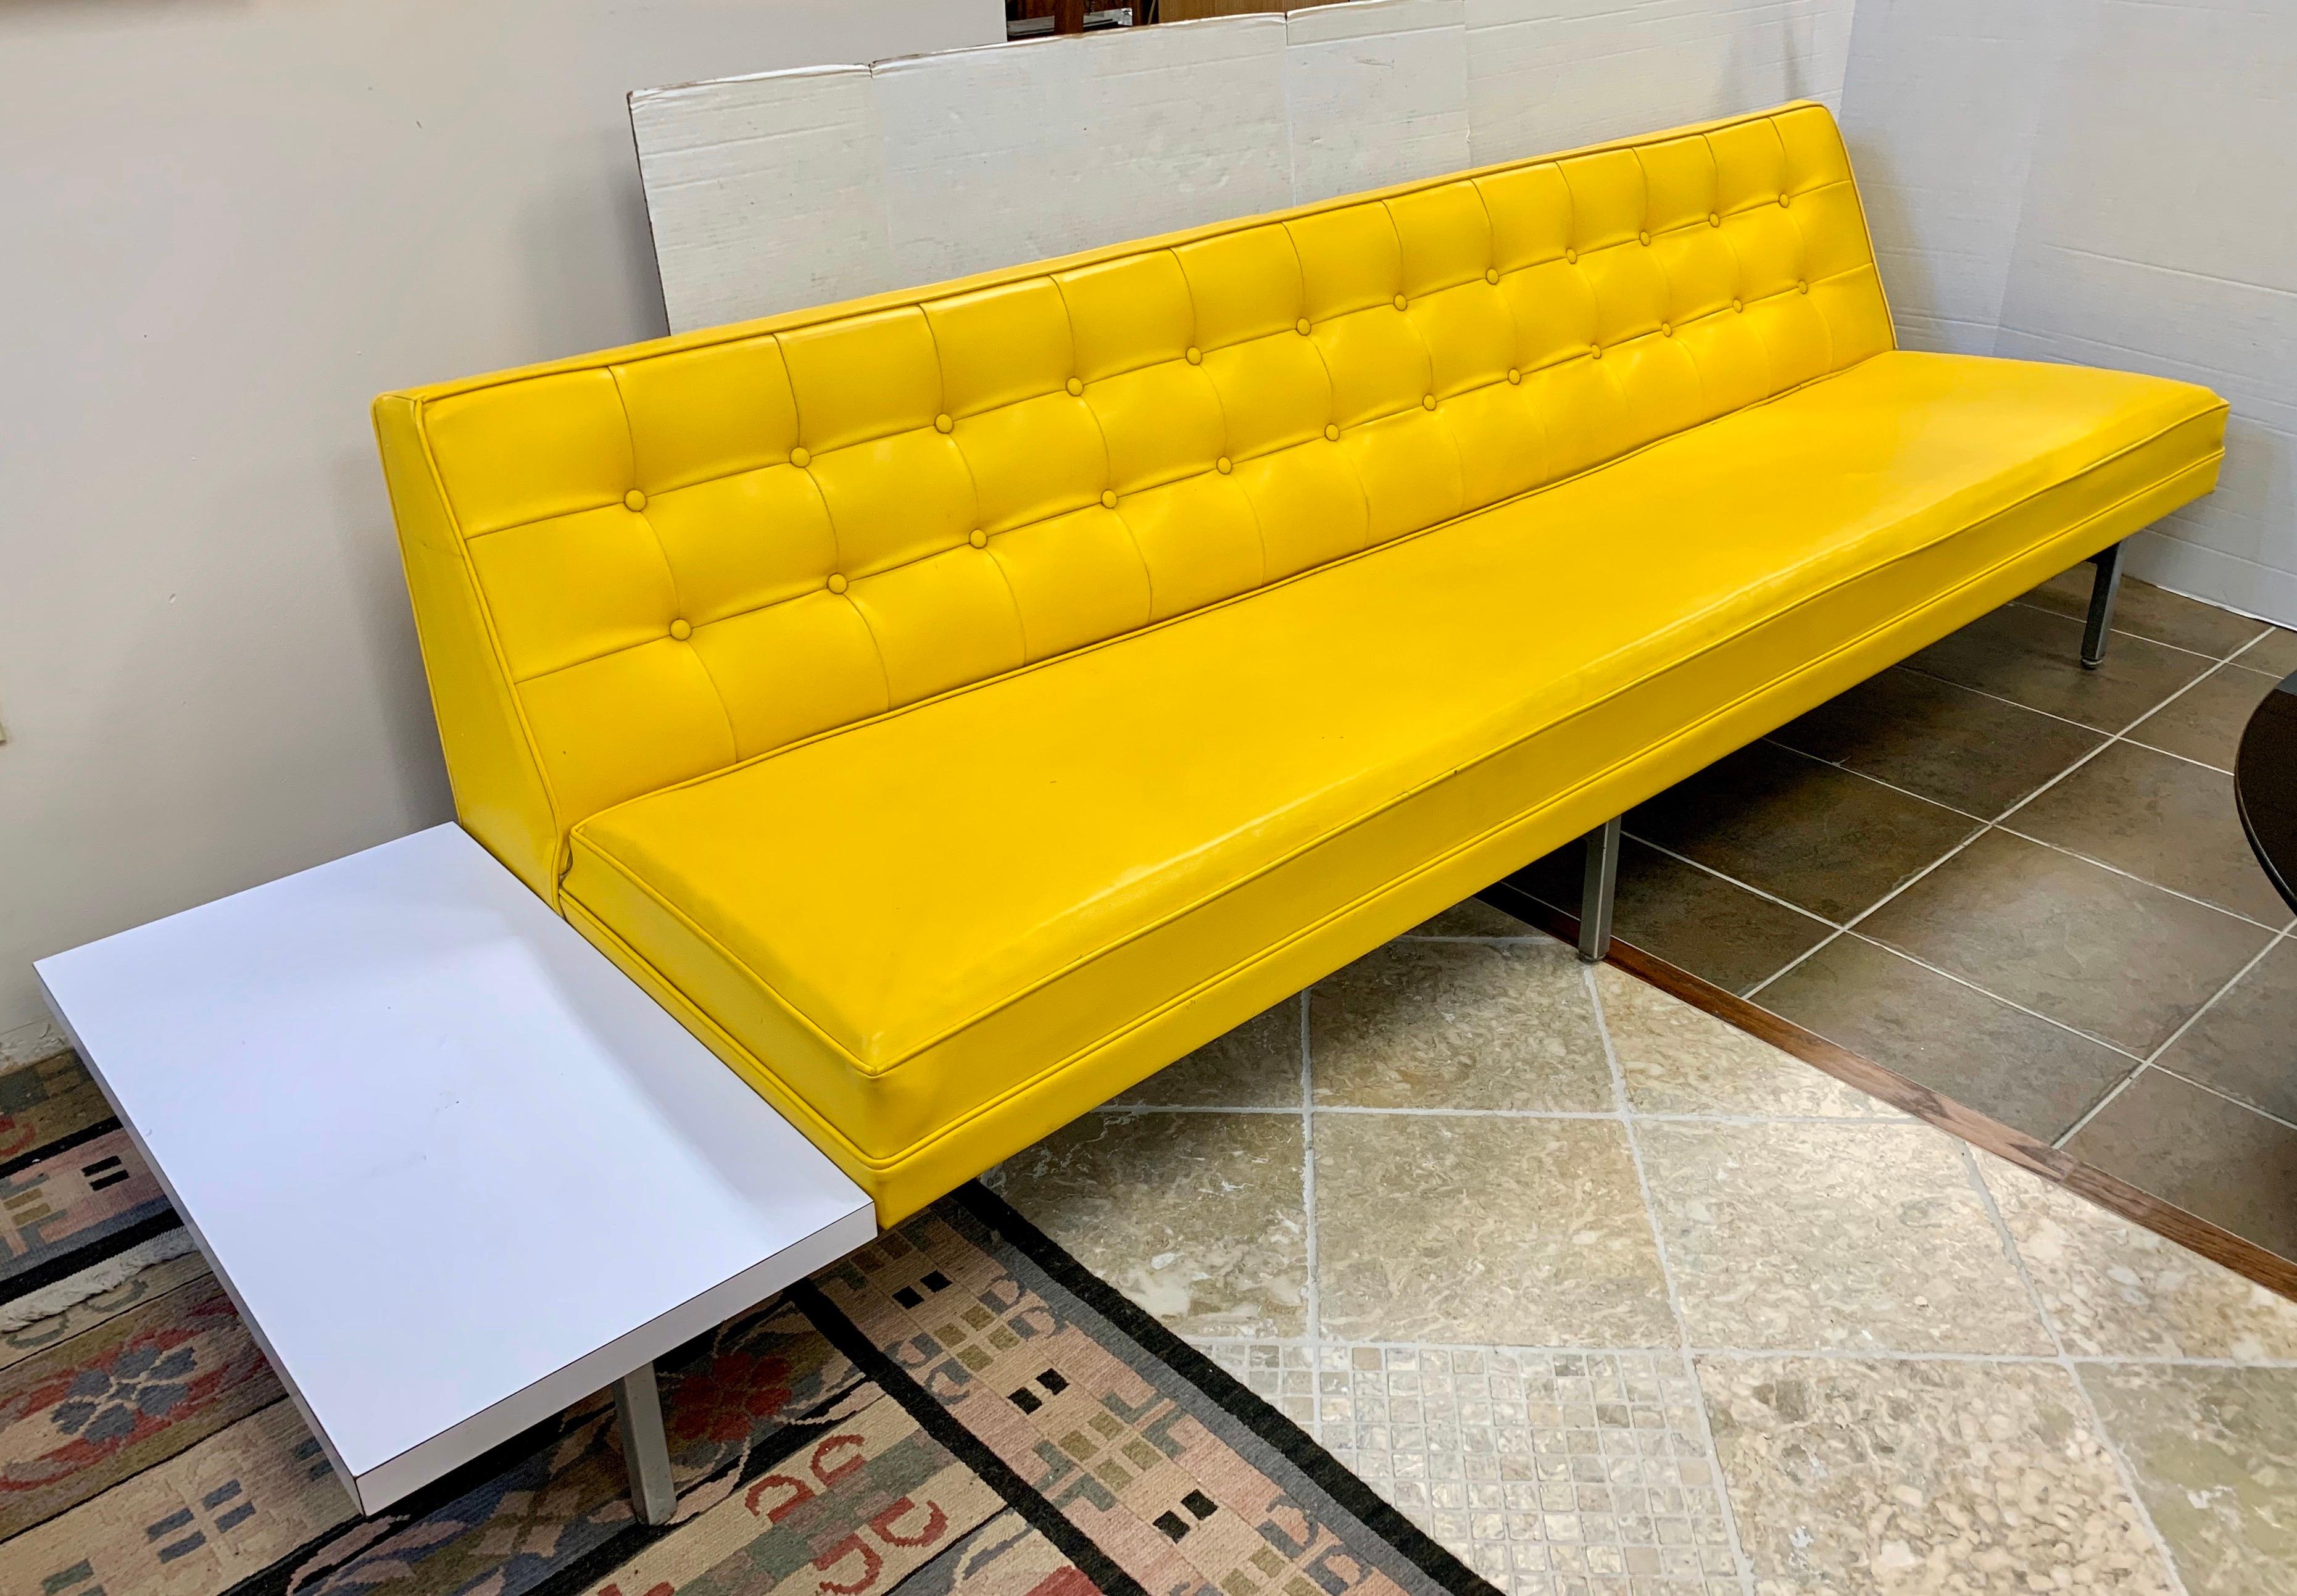 Elegant and iconic midcentury signed living room set designed by George Nelson for Herman Miller.
It features original banana yellow vinyl upholstery which is ultra rare and coveted.
The frame is made of chrome steel. Each of the two modular